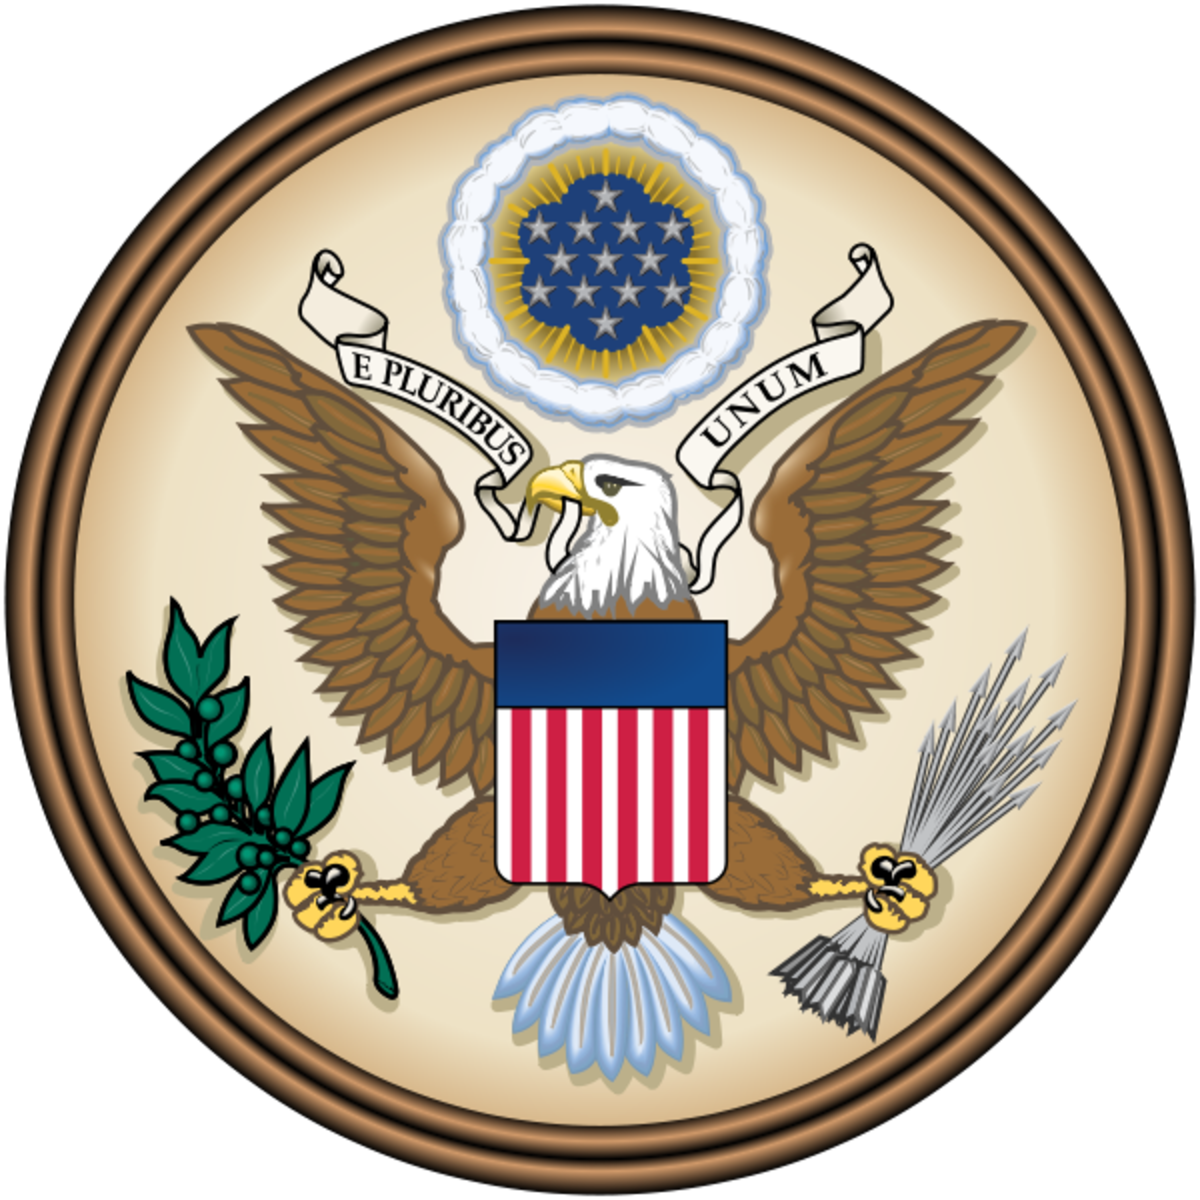 GREAT SEAL OF THE UNITED STATES "E PLURIBUS UNUM" OUT OF MANY ONE